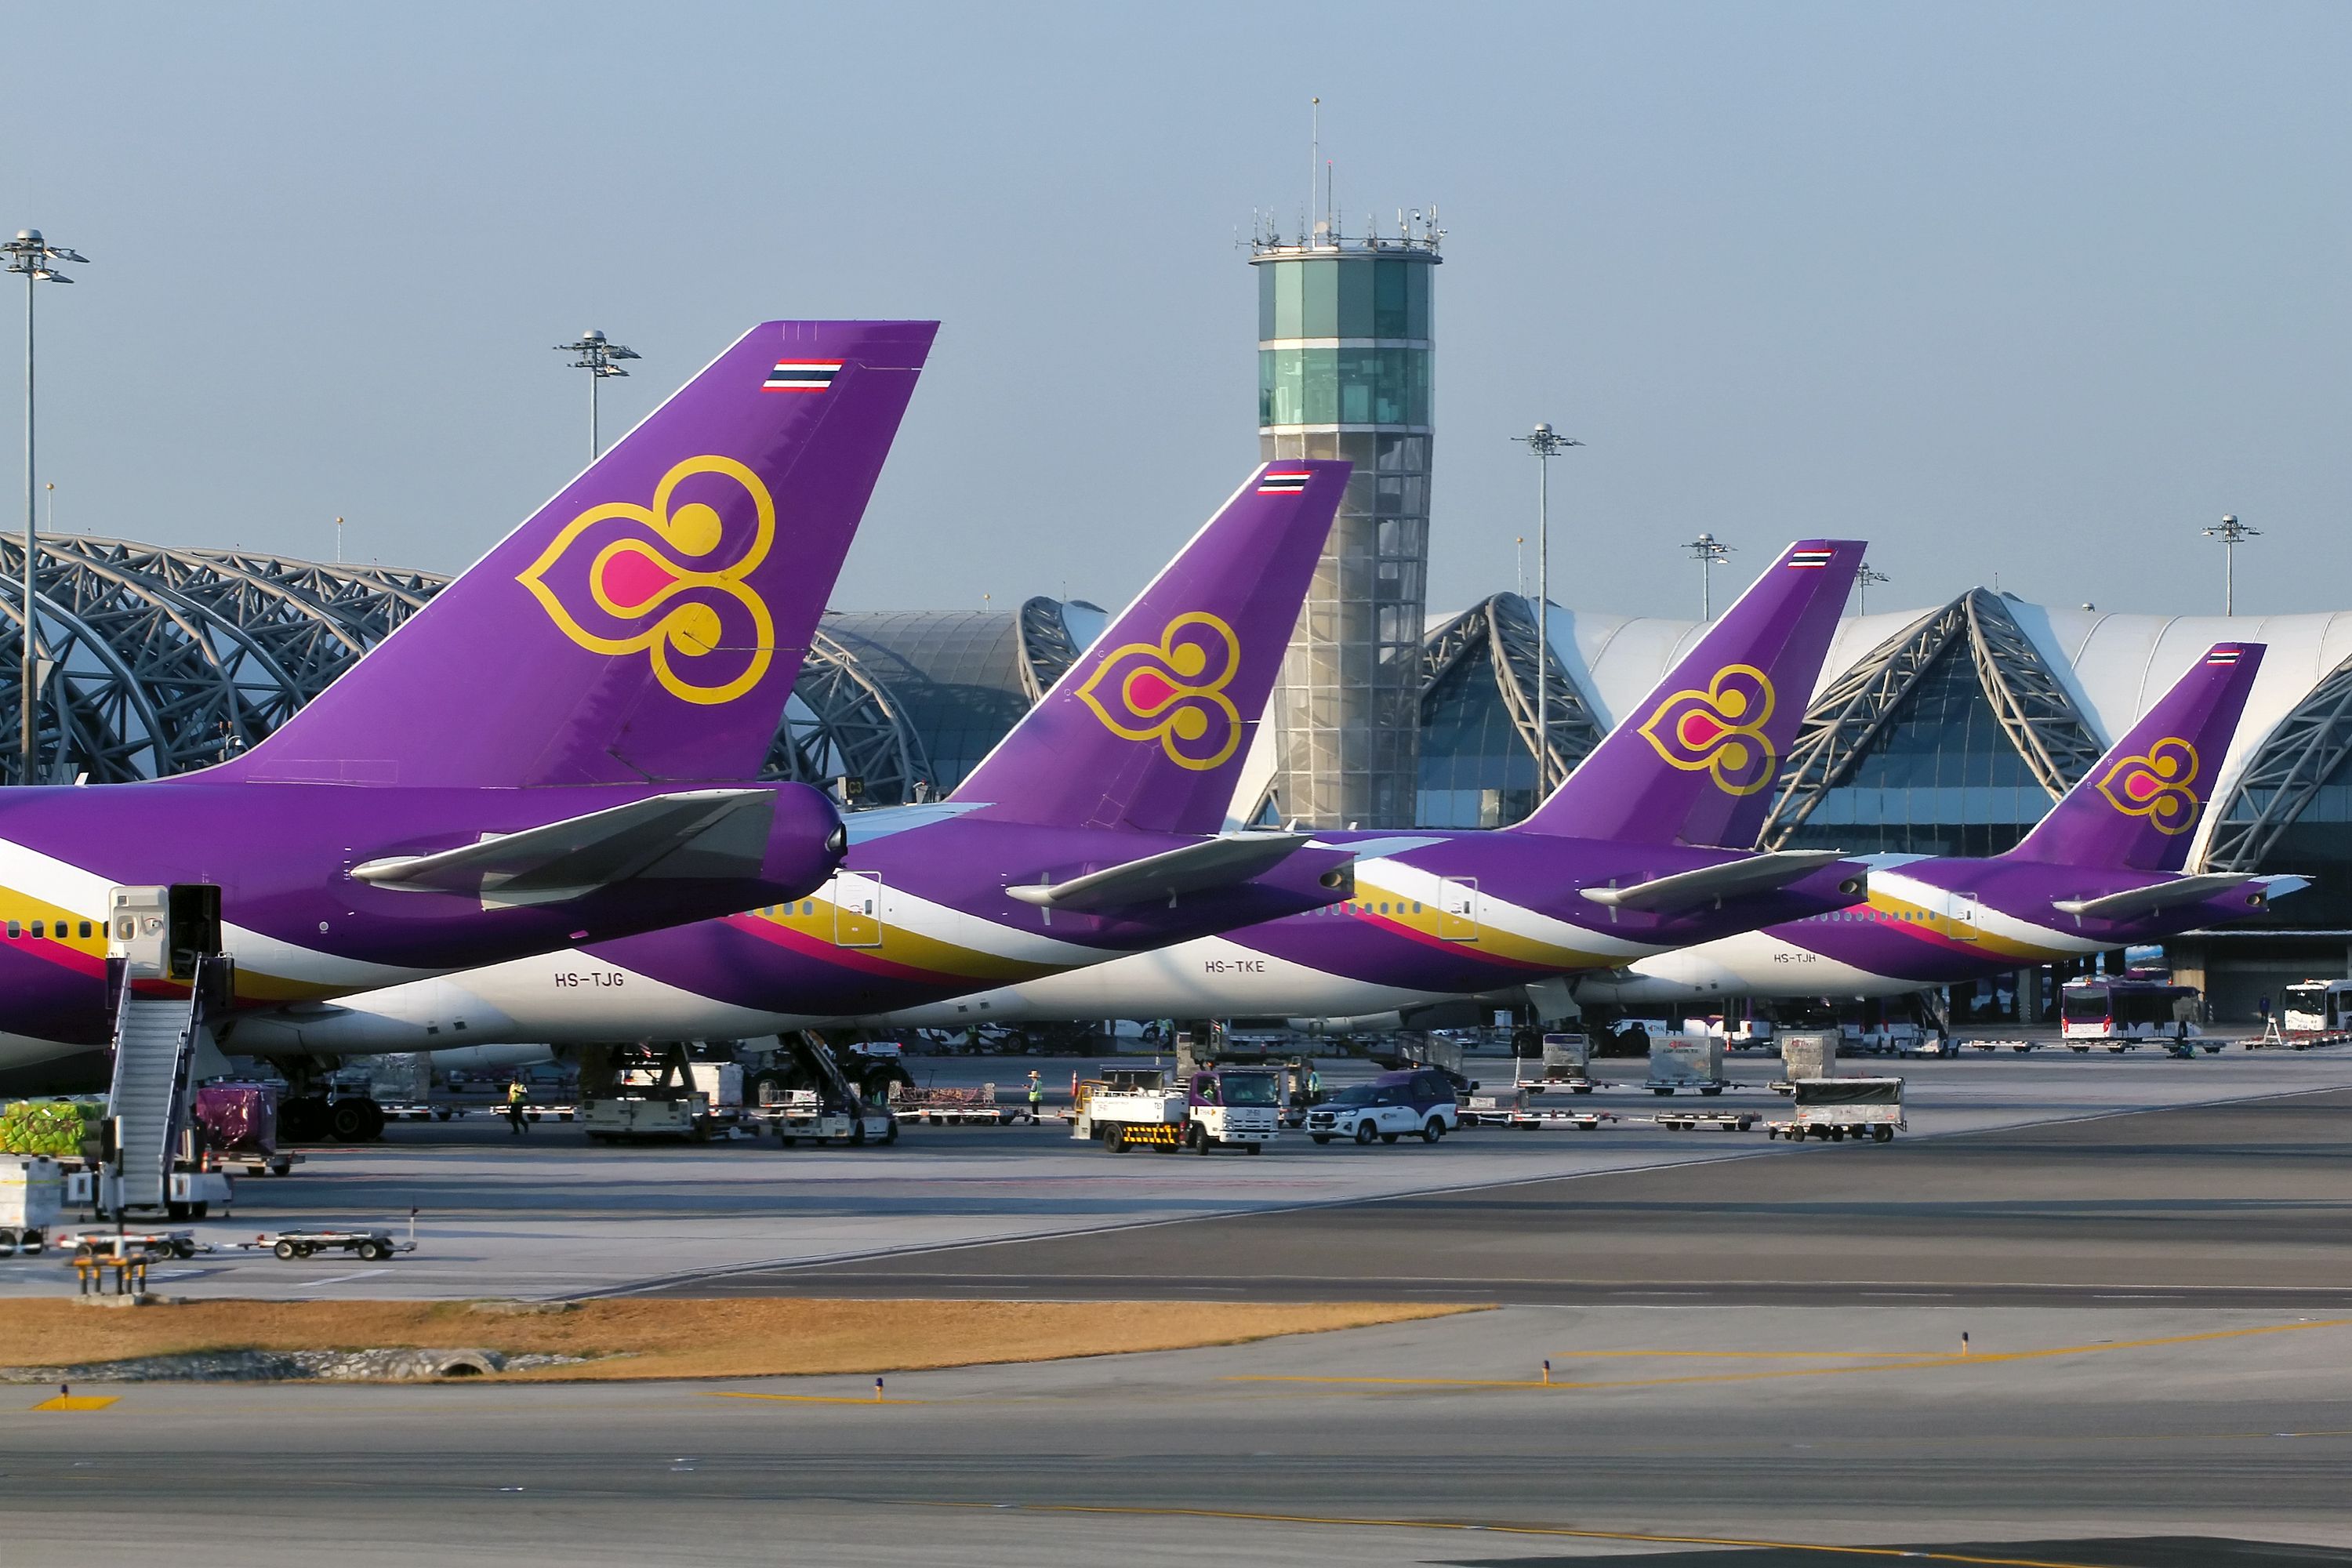 Thai Airways aircraft lined up